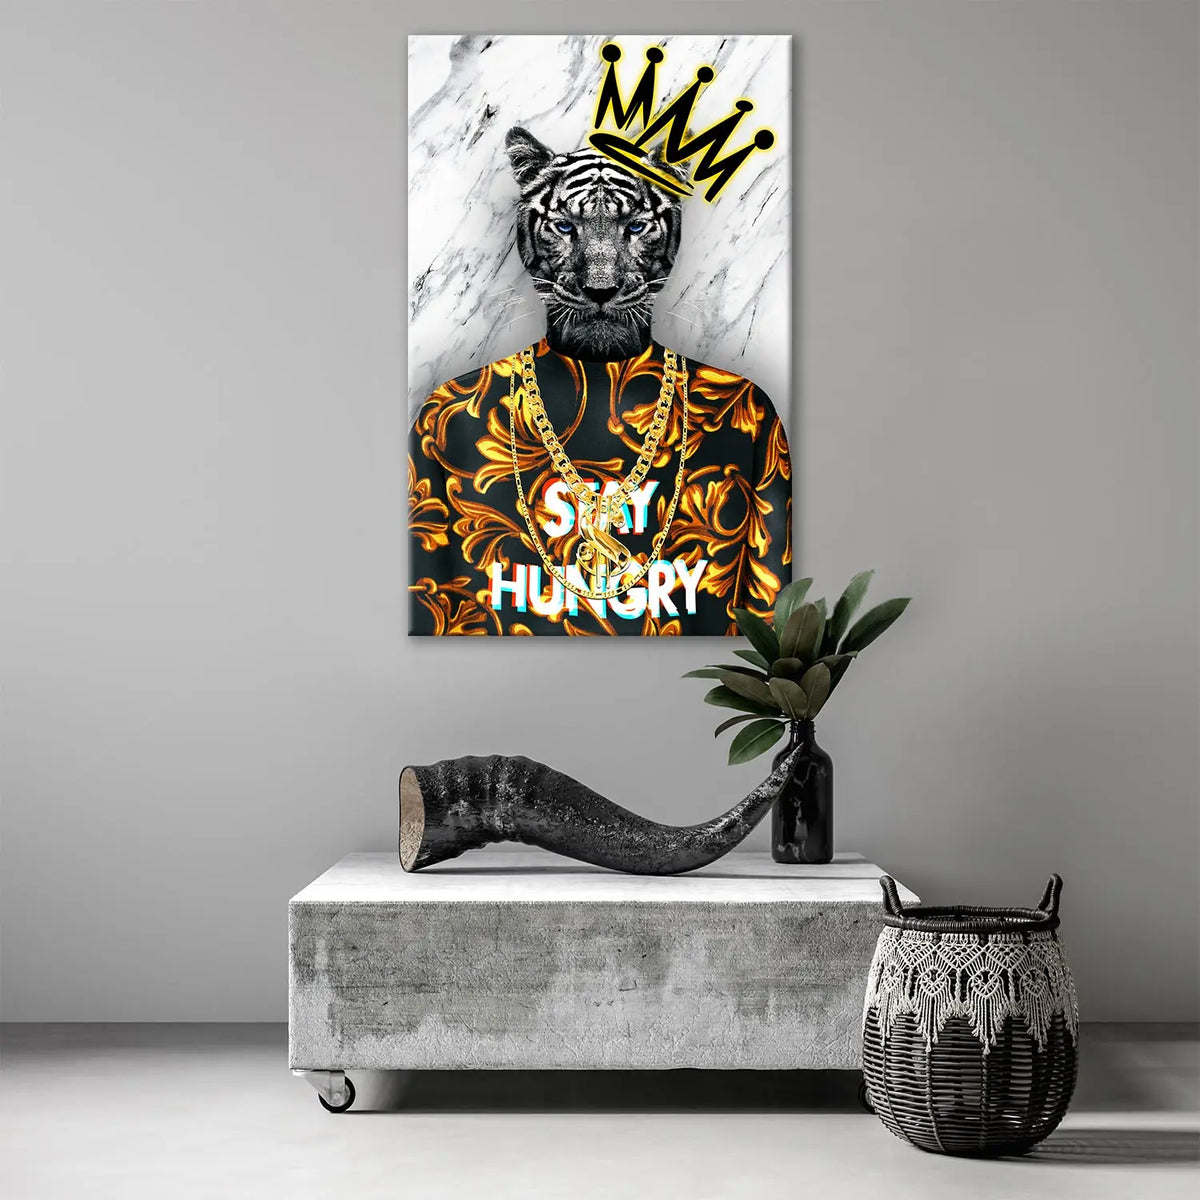 "STAY HUNGRY TIGER" - Art For Everyone